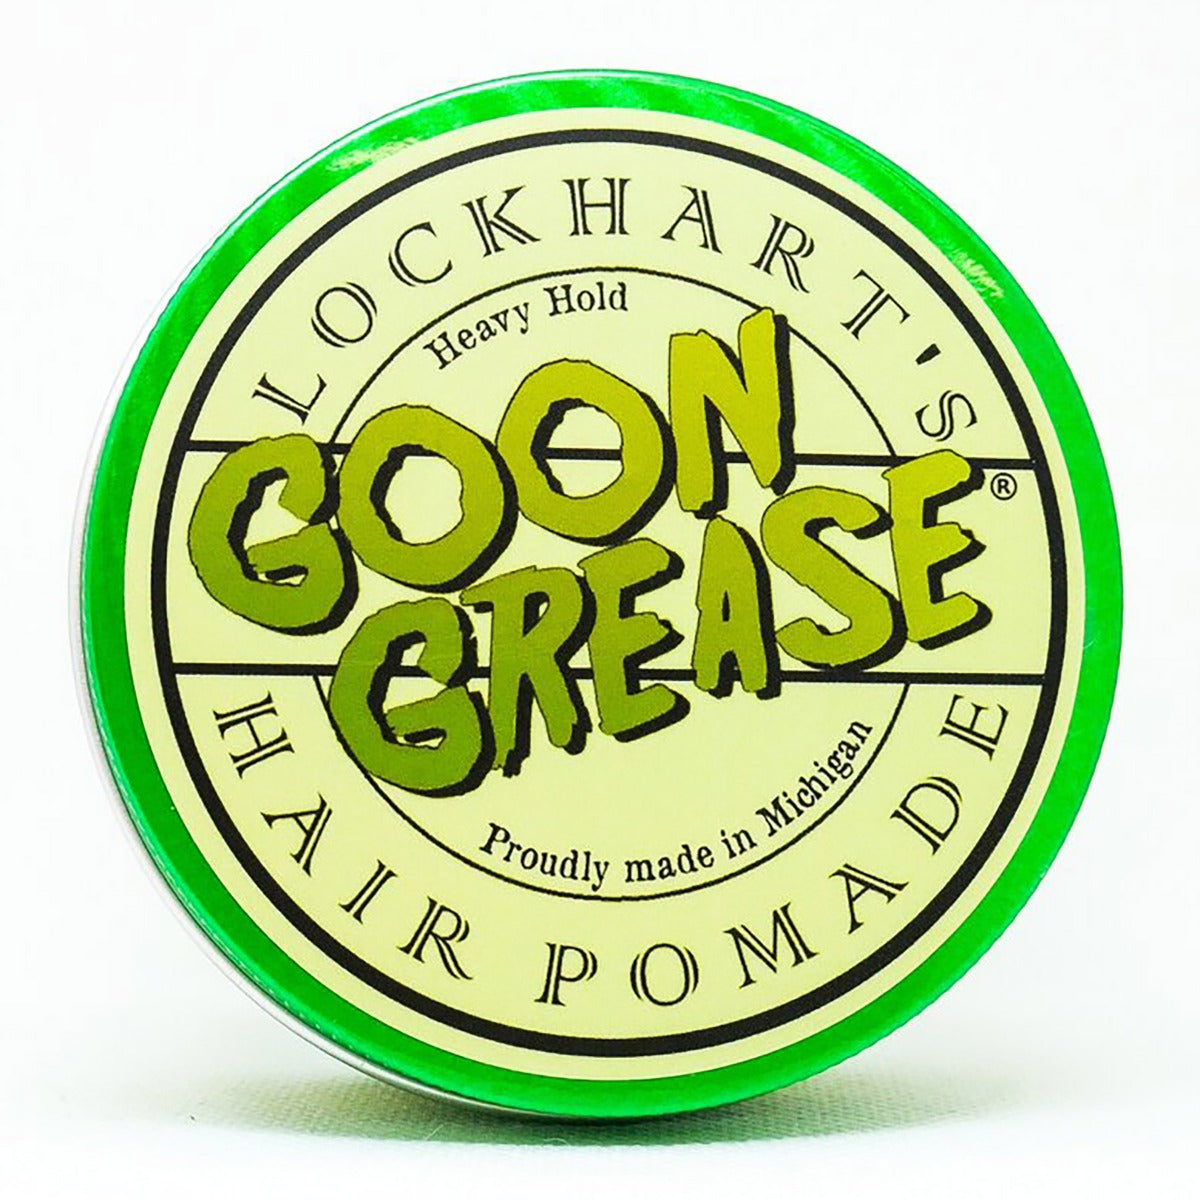 Lockhart's Goon Grease Heavy Hold Hair Pomade cologne scent